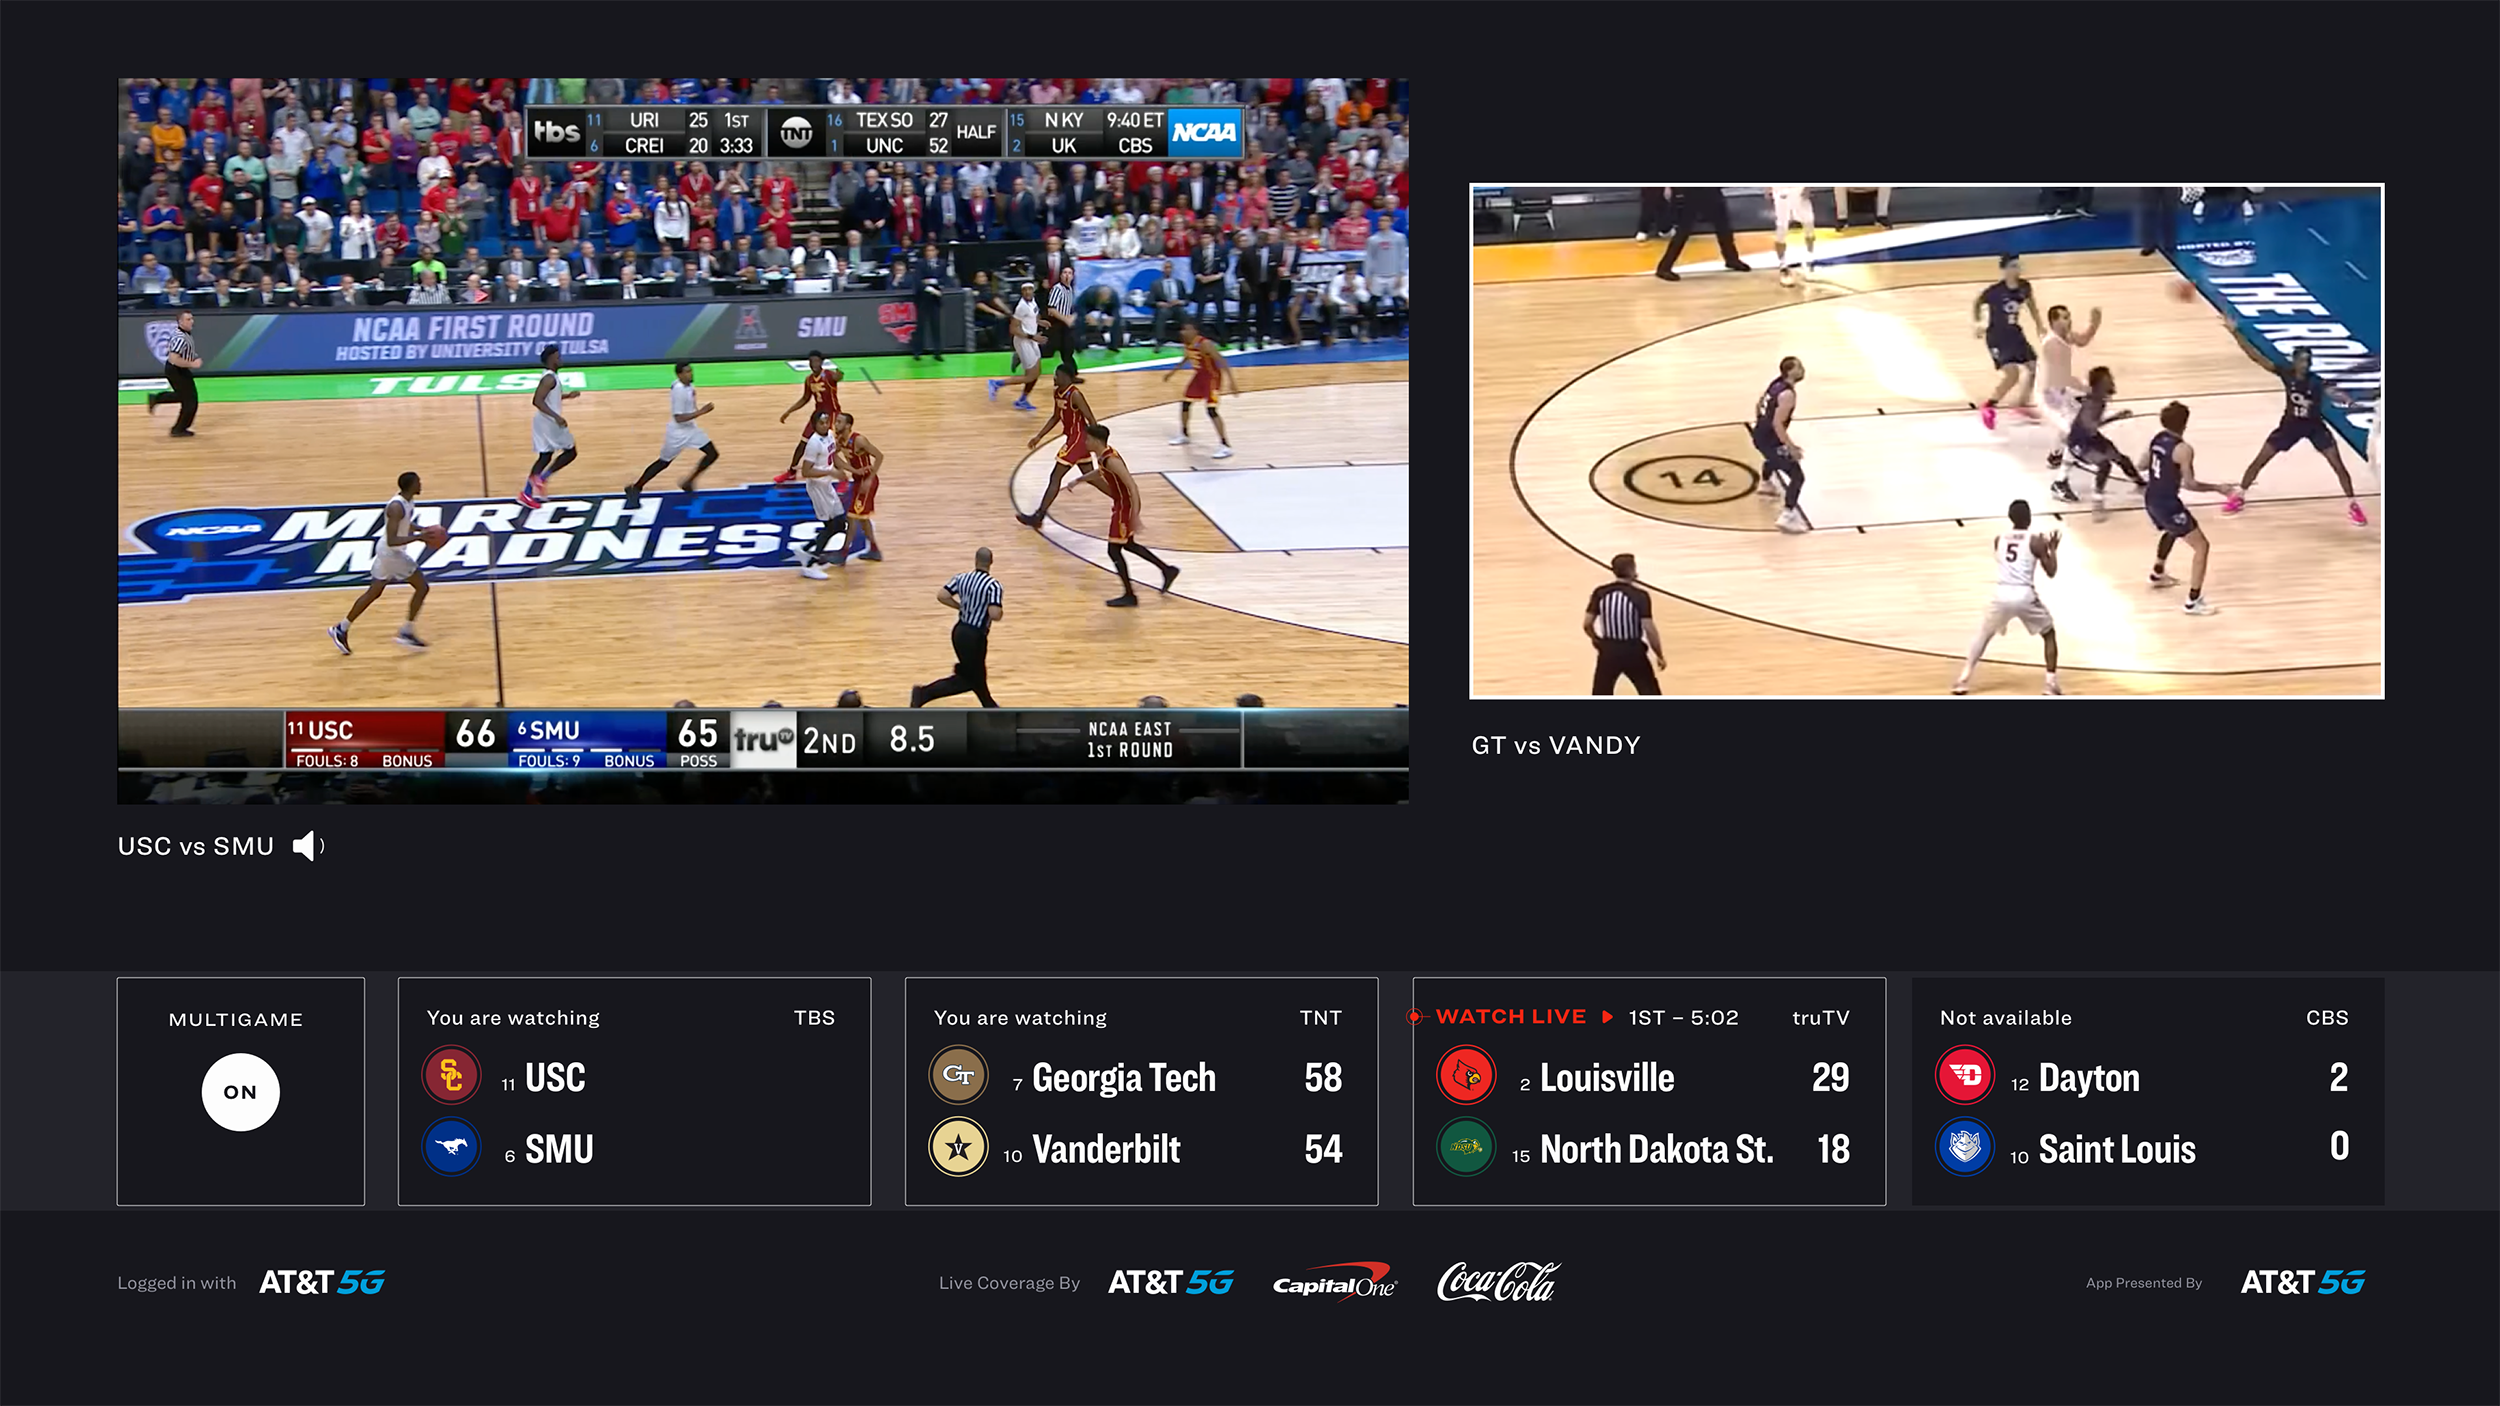 March Madness 2022 March Madness Live Is Back With Improved Streaming-Video Quality, New Interactive Features